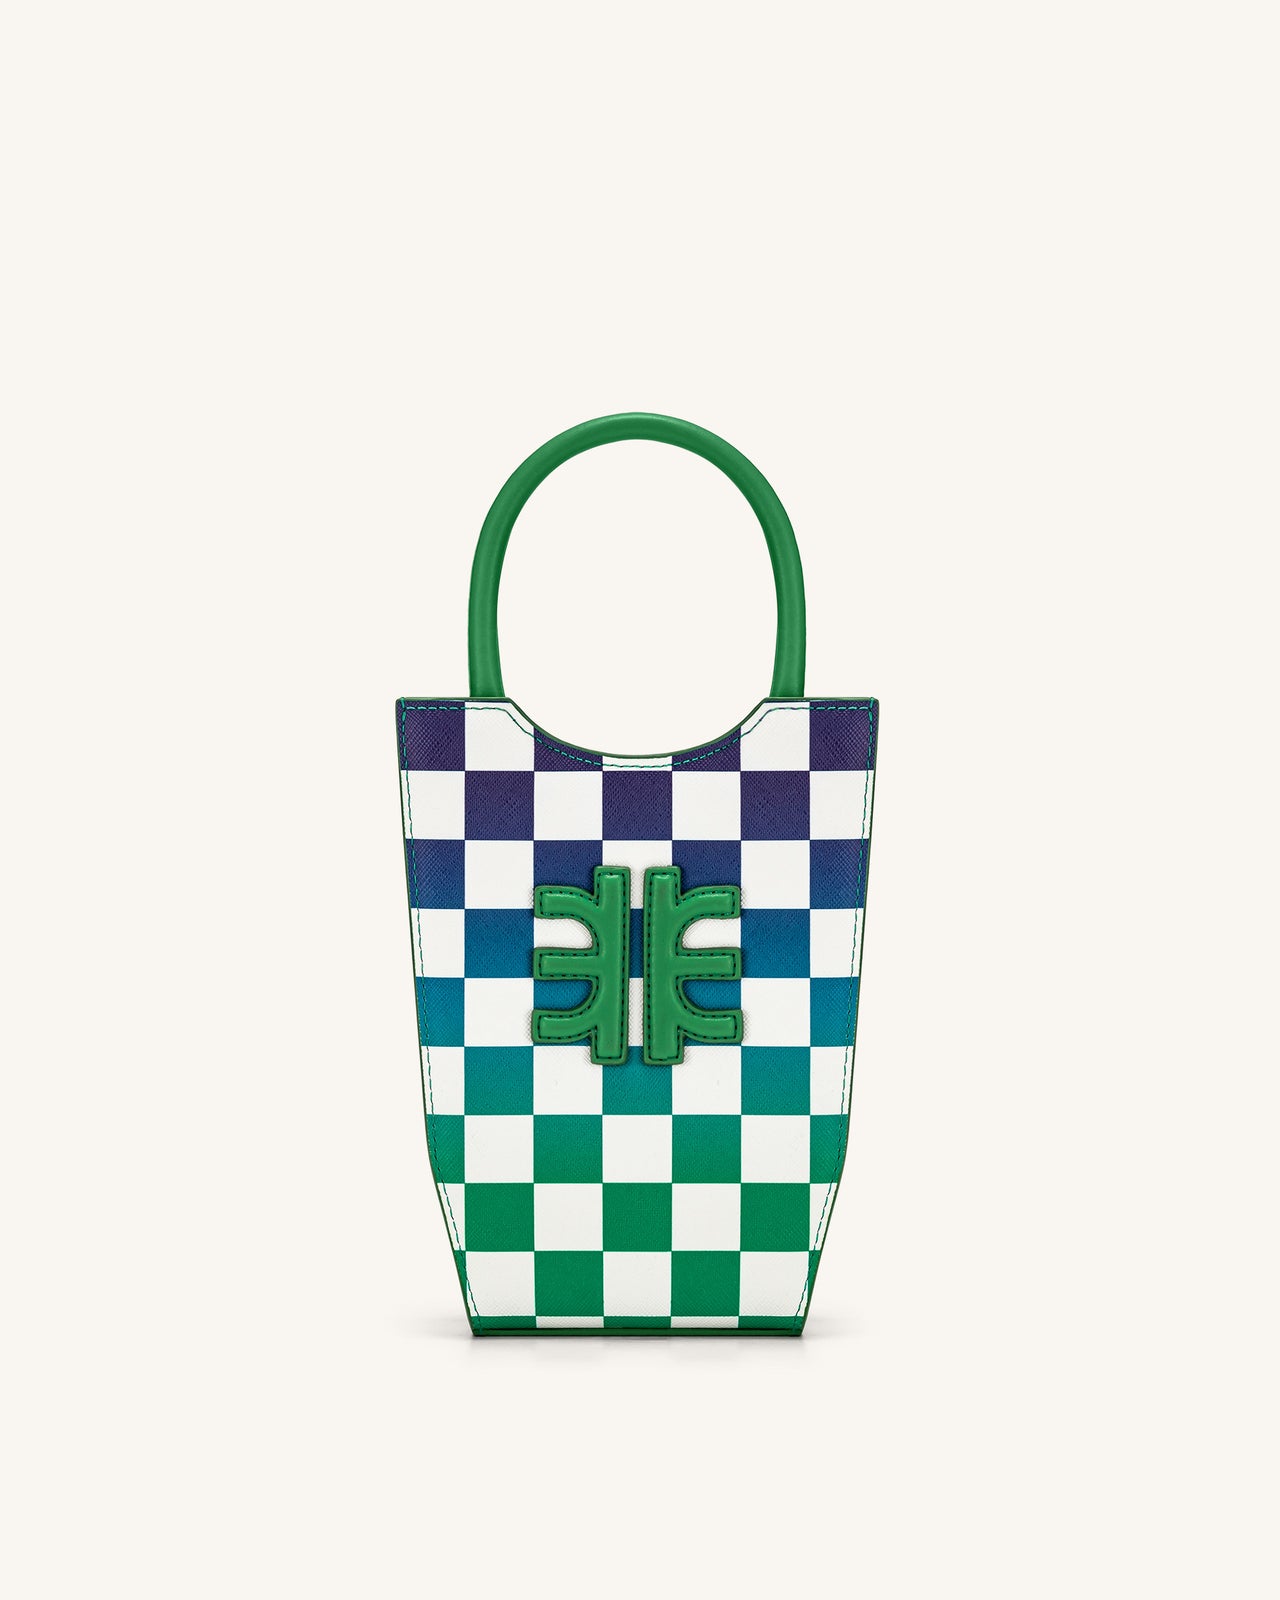 JW Pei FEI Gradient Checkerboard Phone Bag, From Egg Shoes to Cutouts,  Here's What Fashion Editors Are Loving This Month